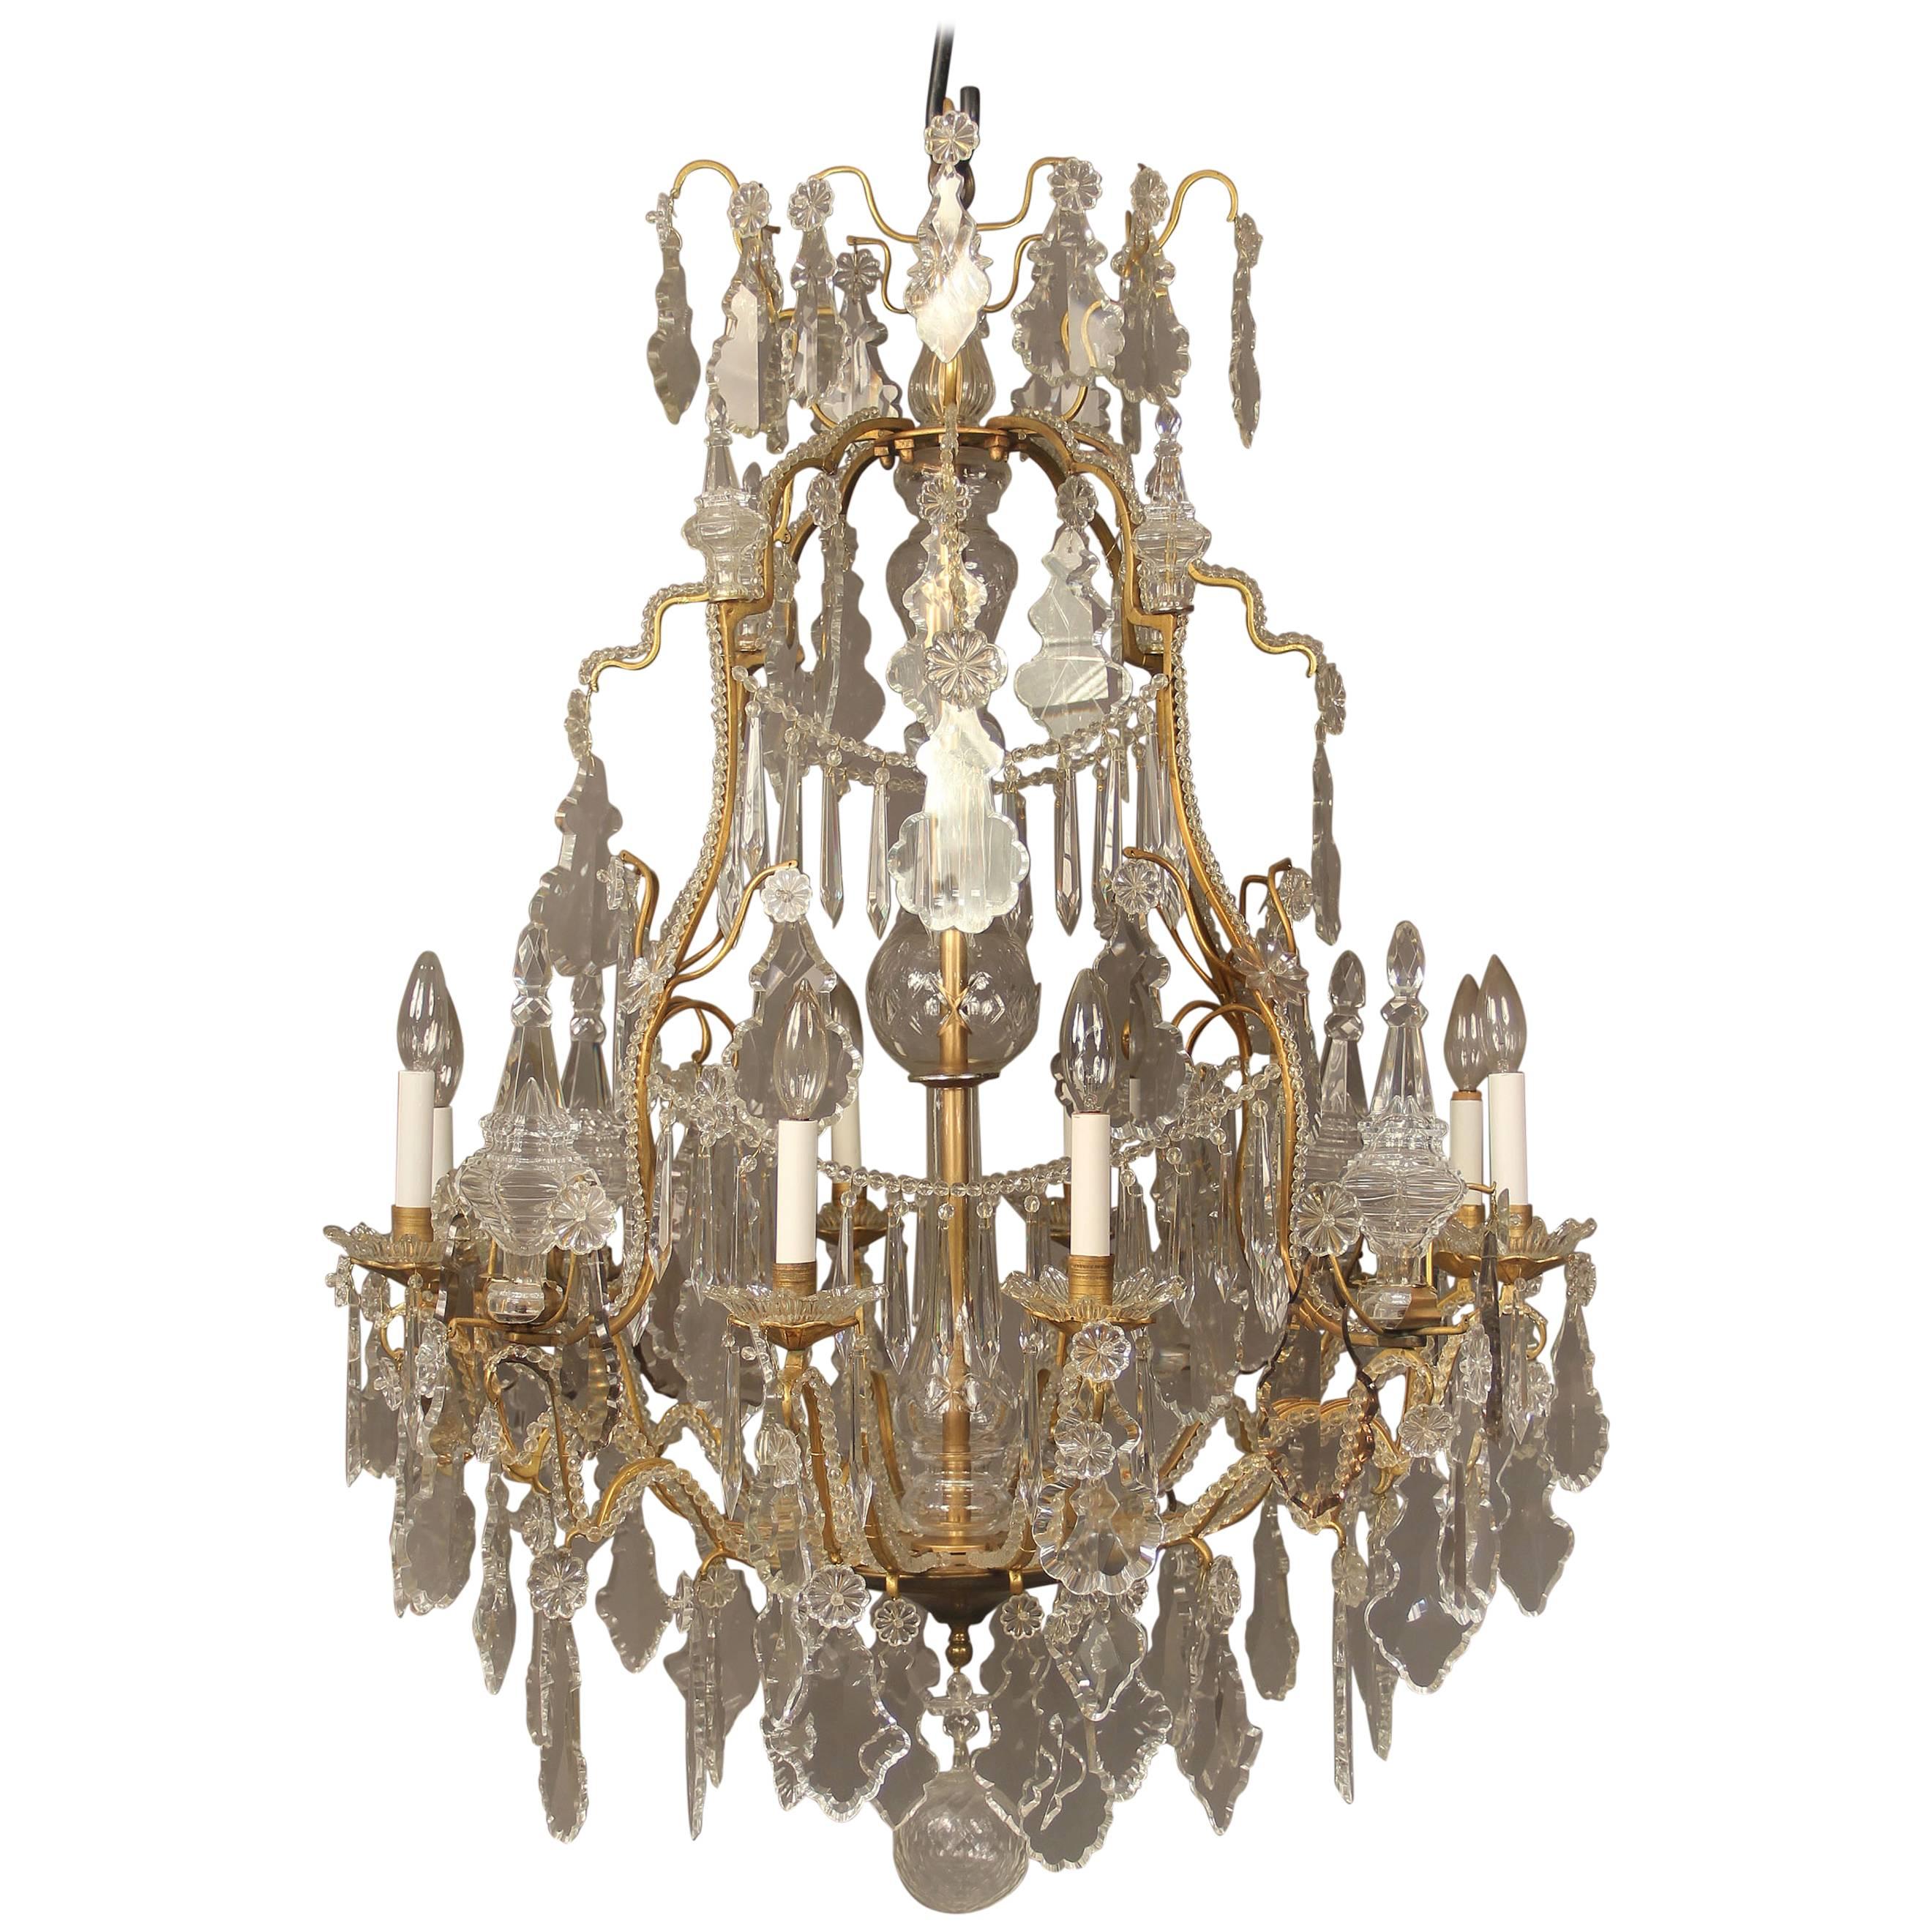 Very Fine Late 19th Century Gilt Bronze and Crystal Chandelier